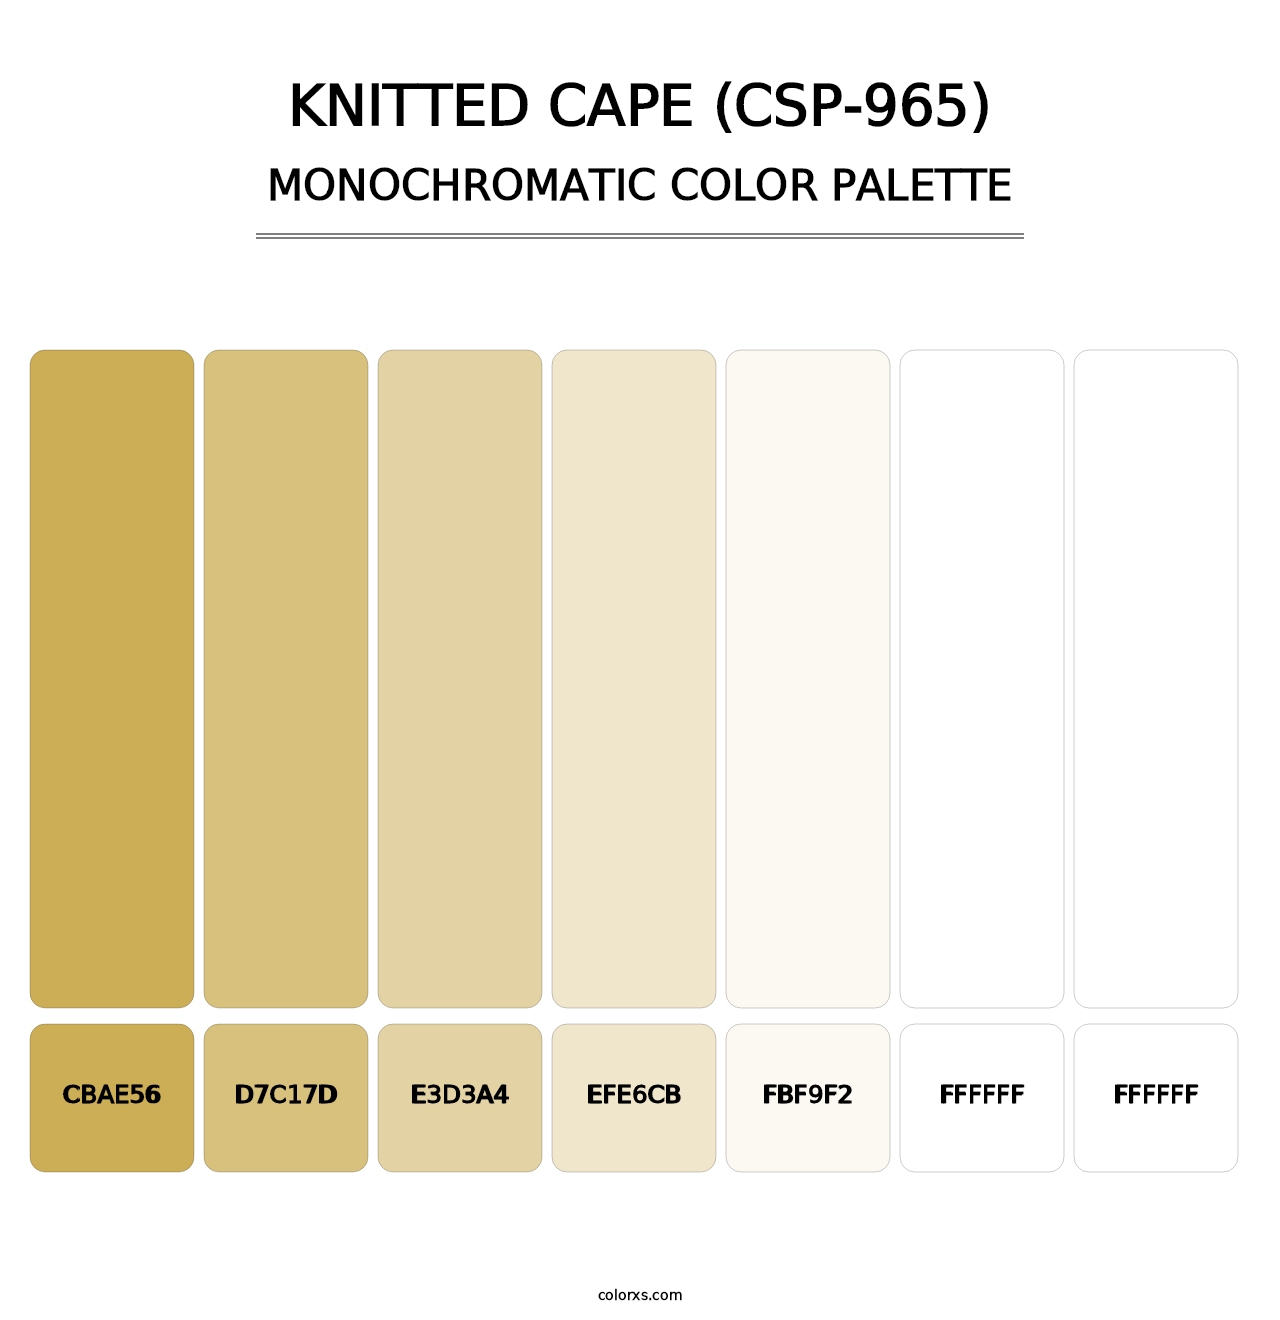 Knitted Cape (CSP-965) - Monochromatic Color Palette